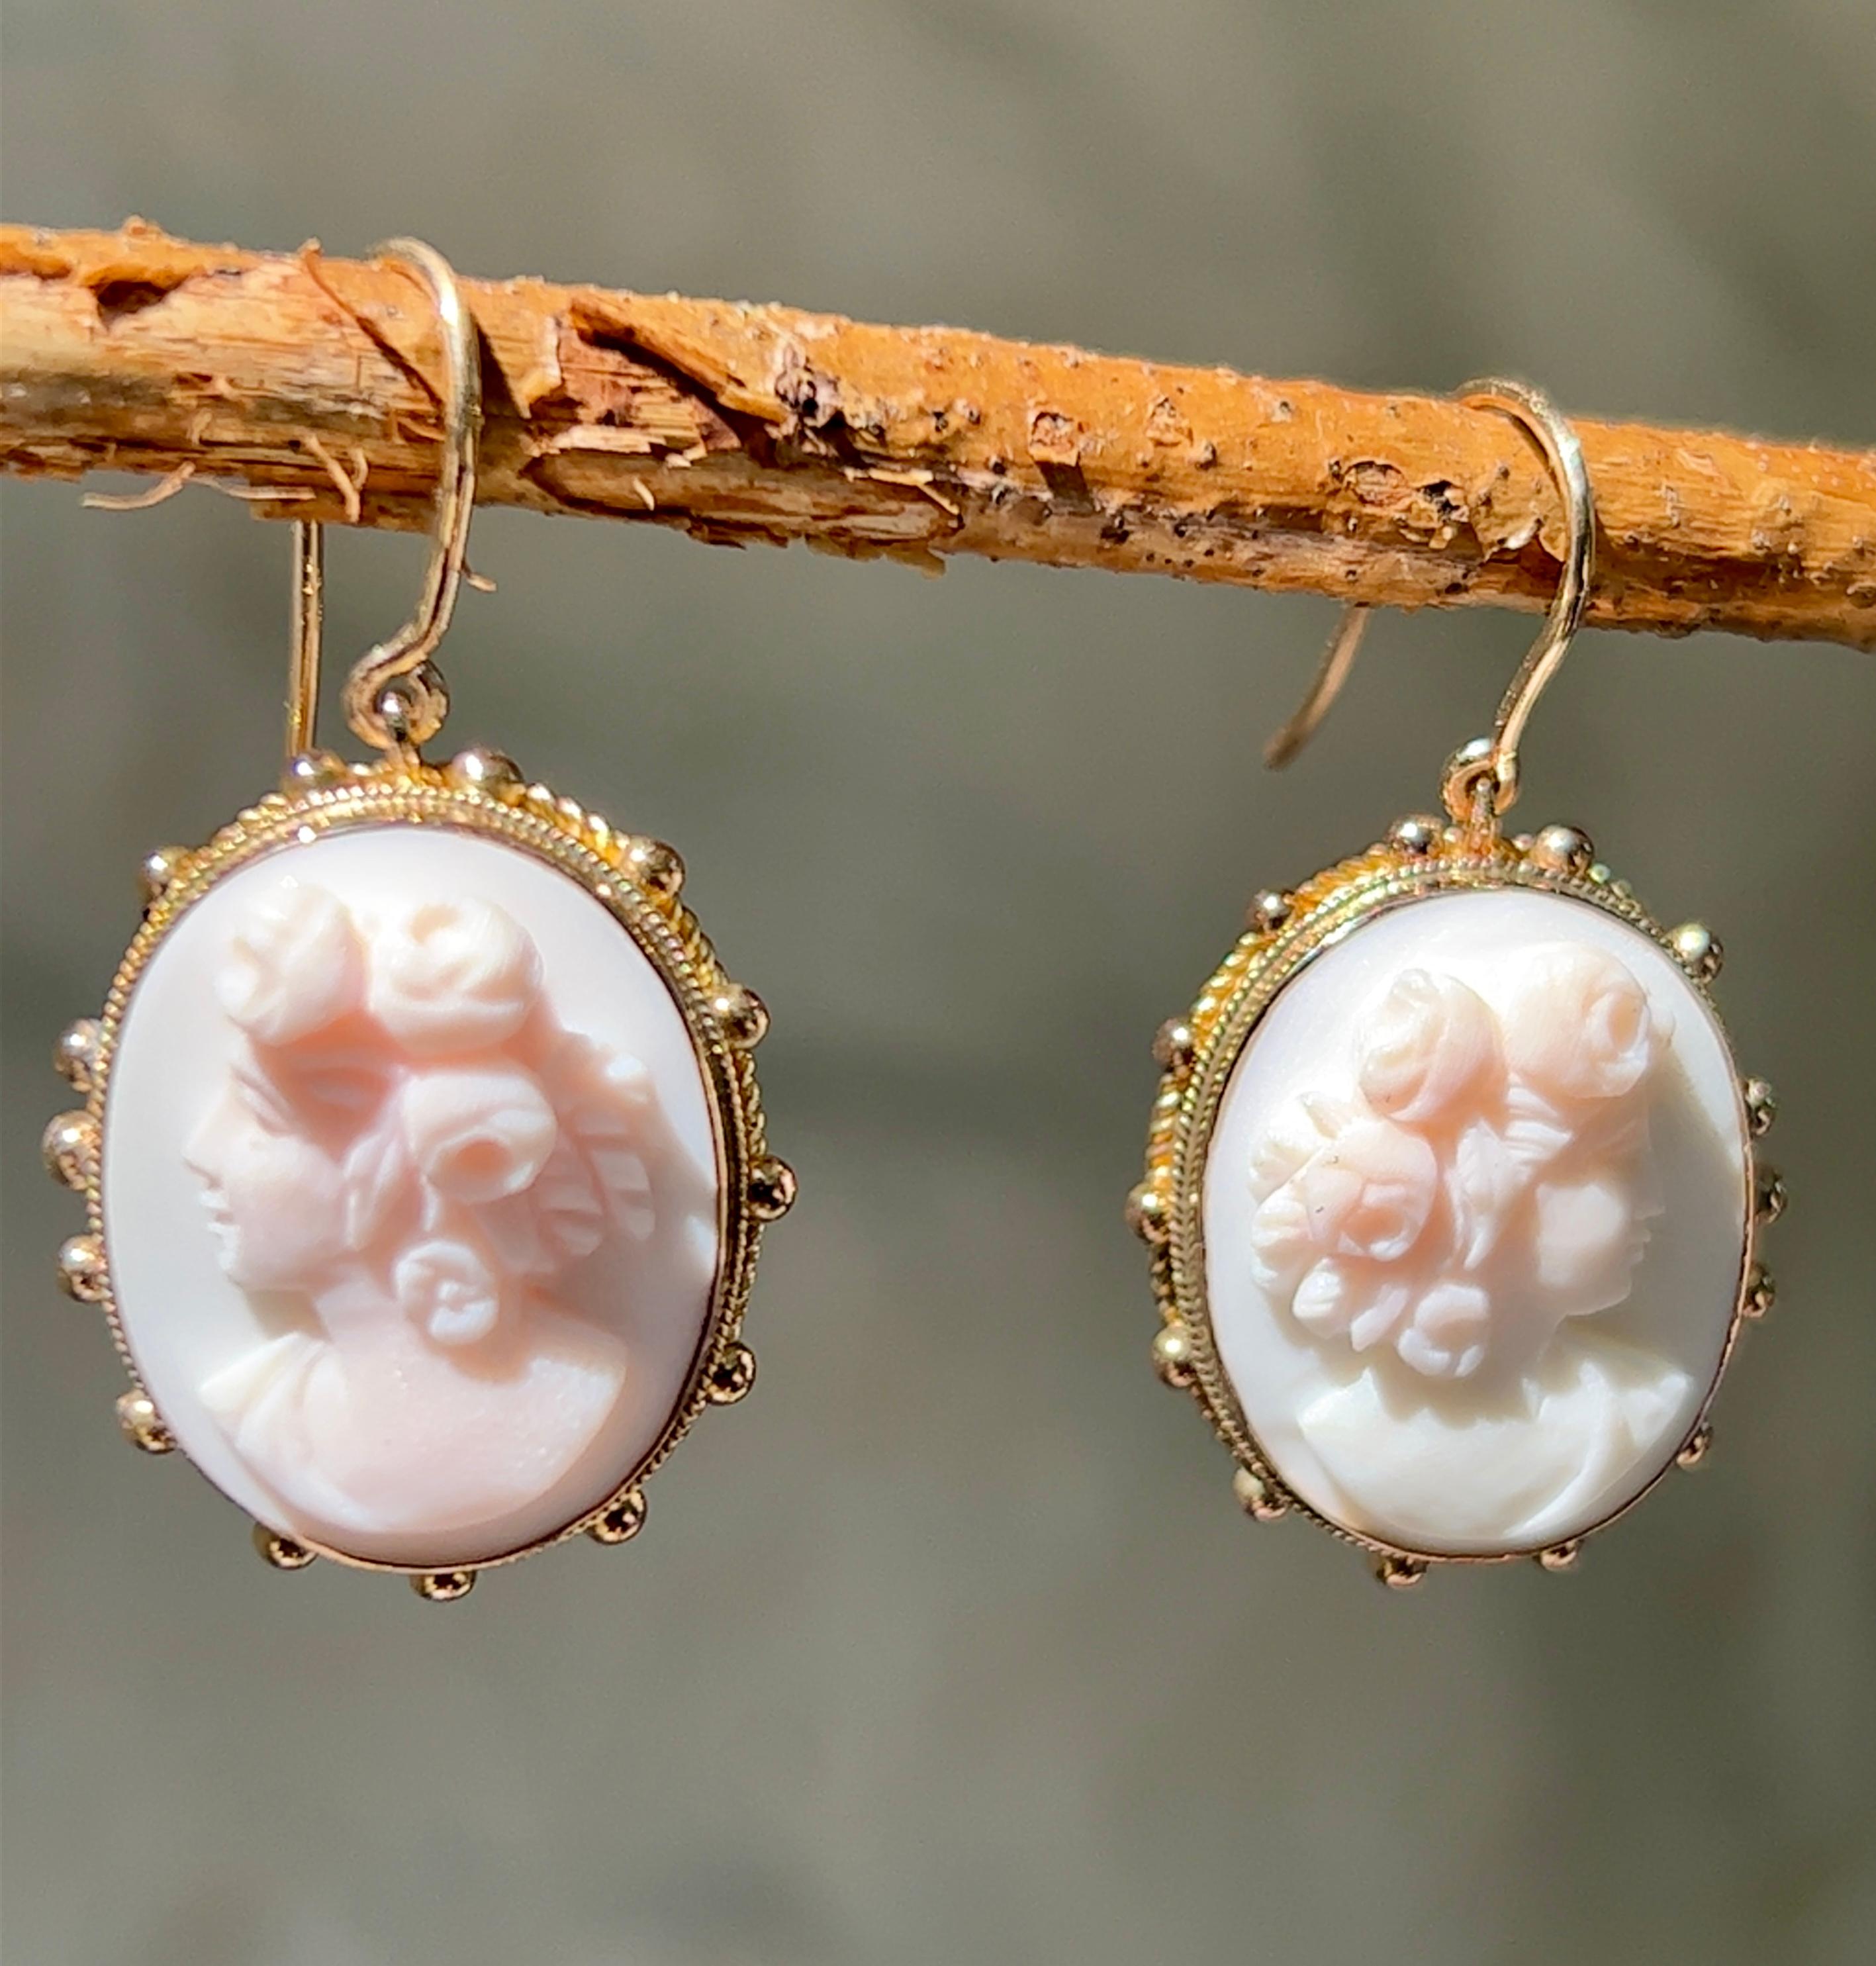 One pair of 14-karat yellow gold pink conch shell cameo earrings measuring 1.25 inches long and 0.75 of an inch wide. The earrings are complete with traditional hook closures.
